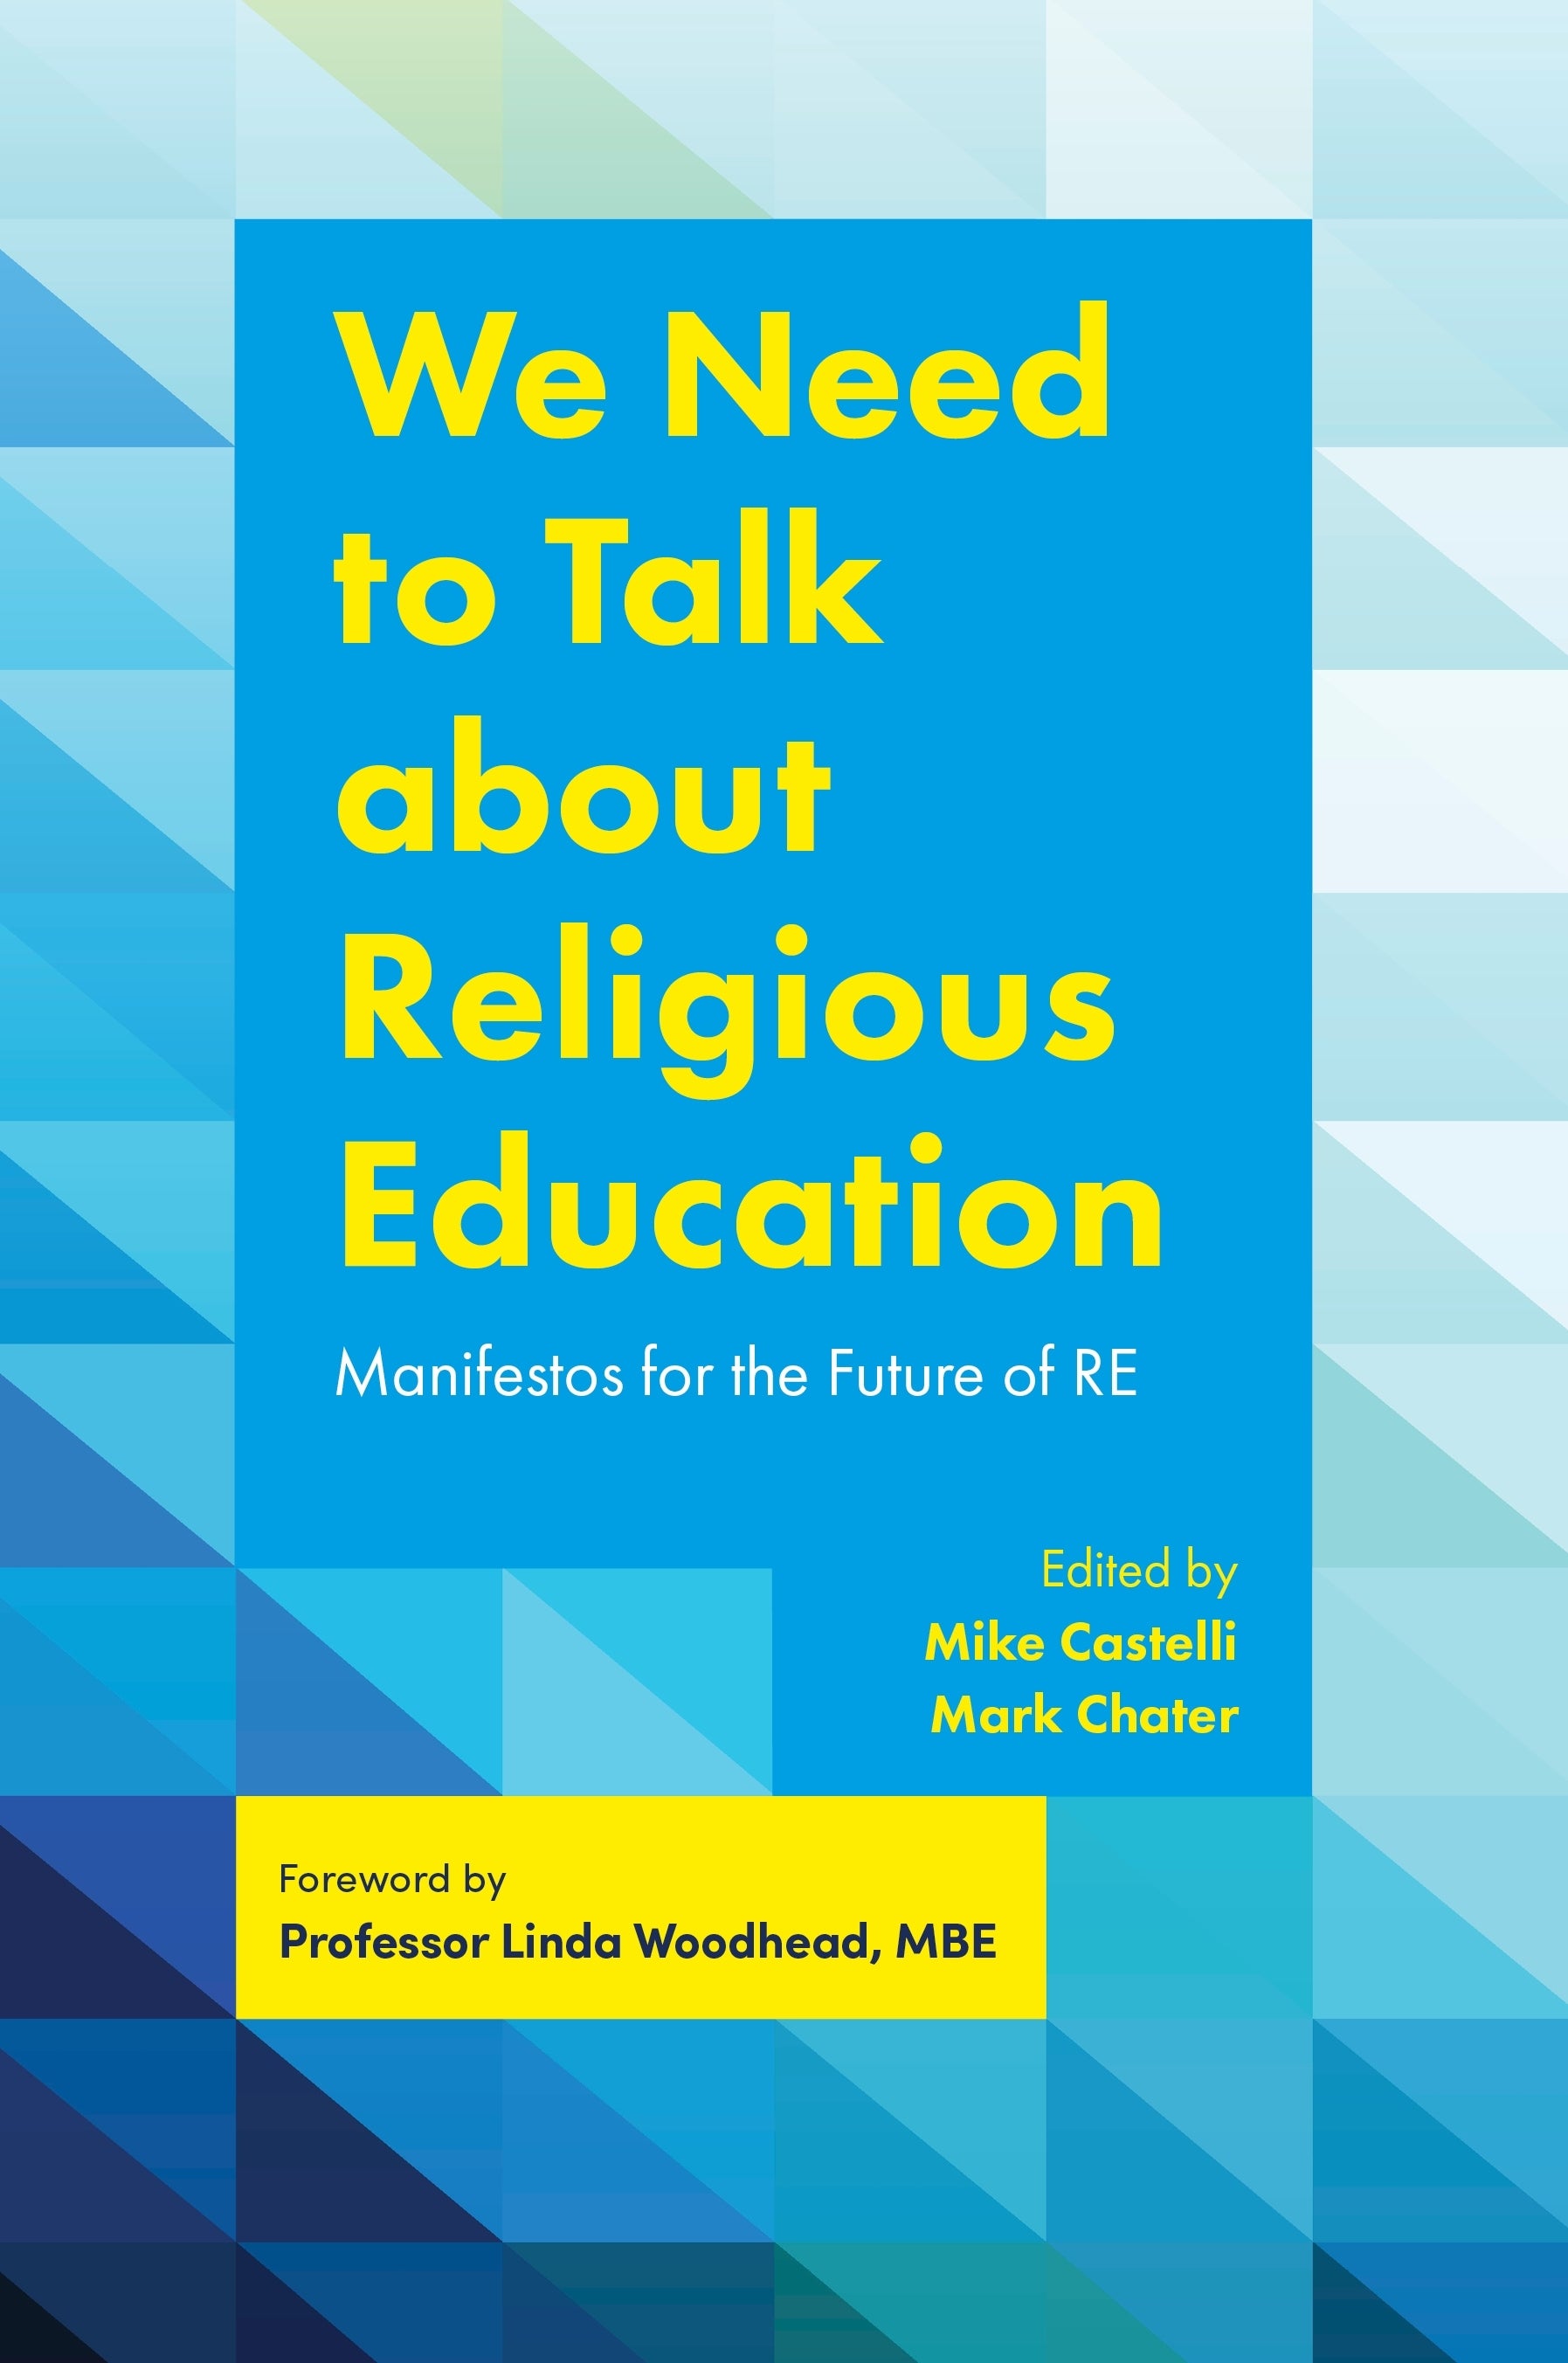 We Need to Talk about Religious Education by Mark Chater, Mike Castelli, Linda Woodhead, Zameer Hussain, No Author Listed